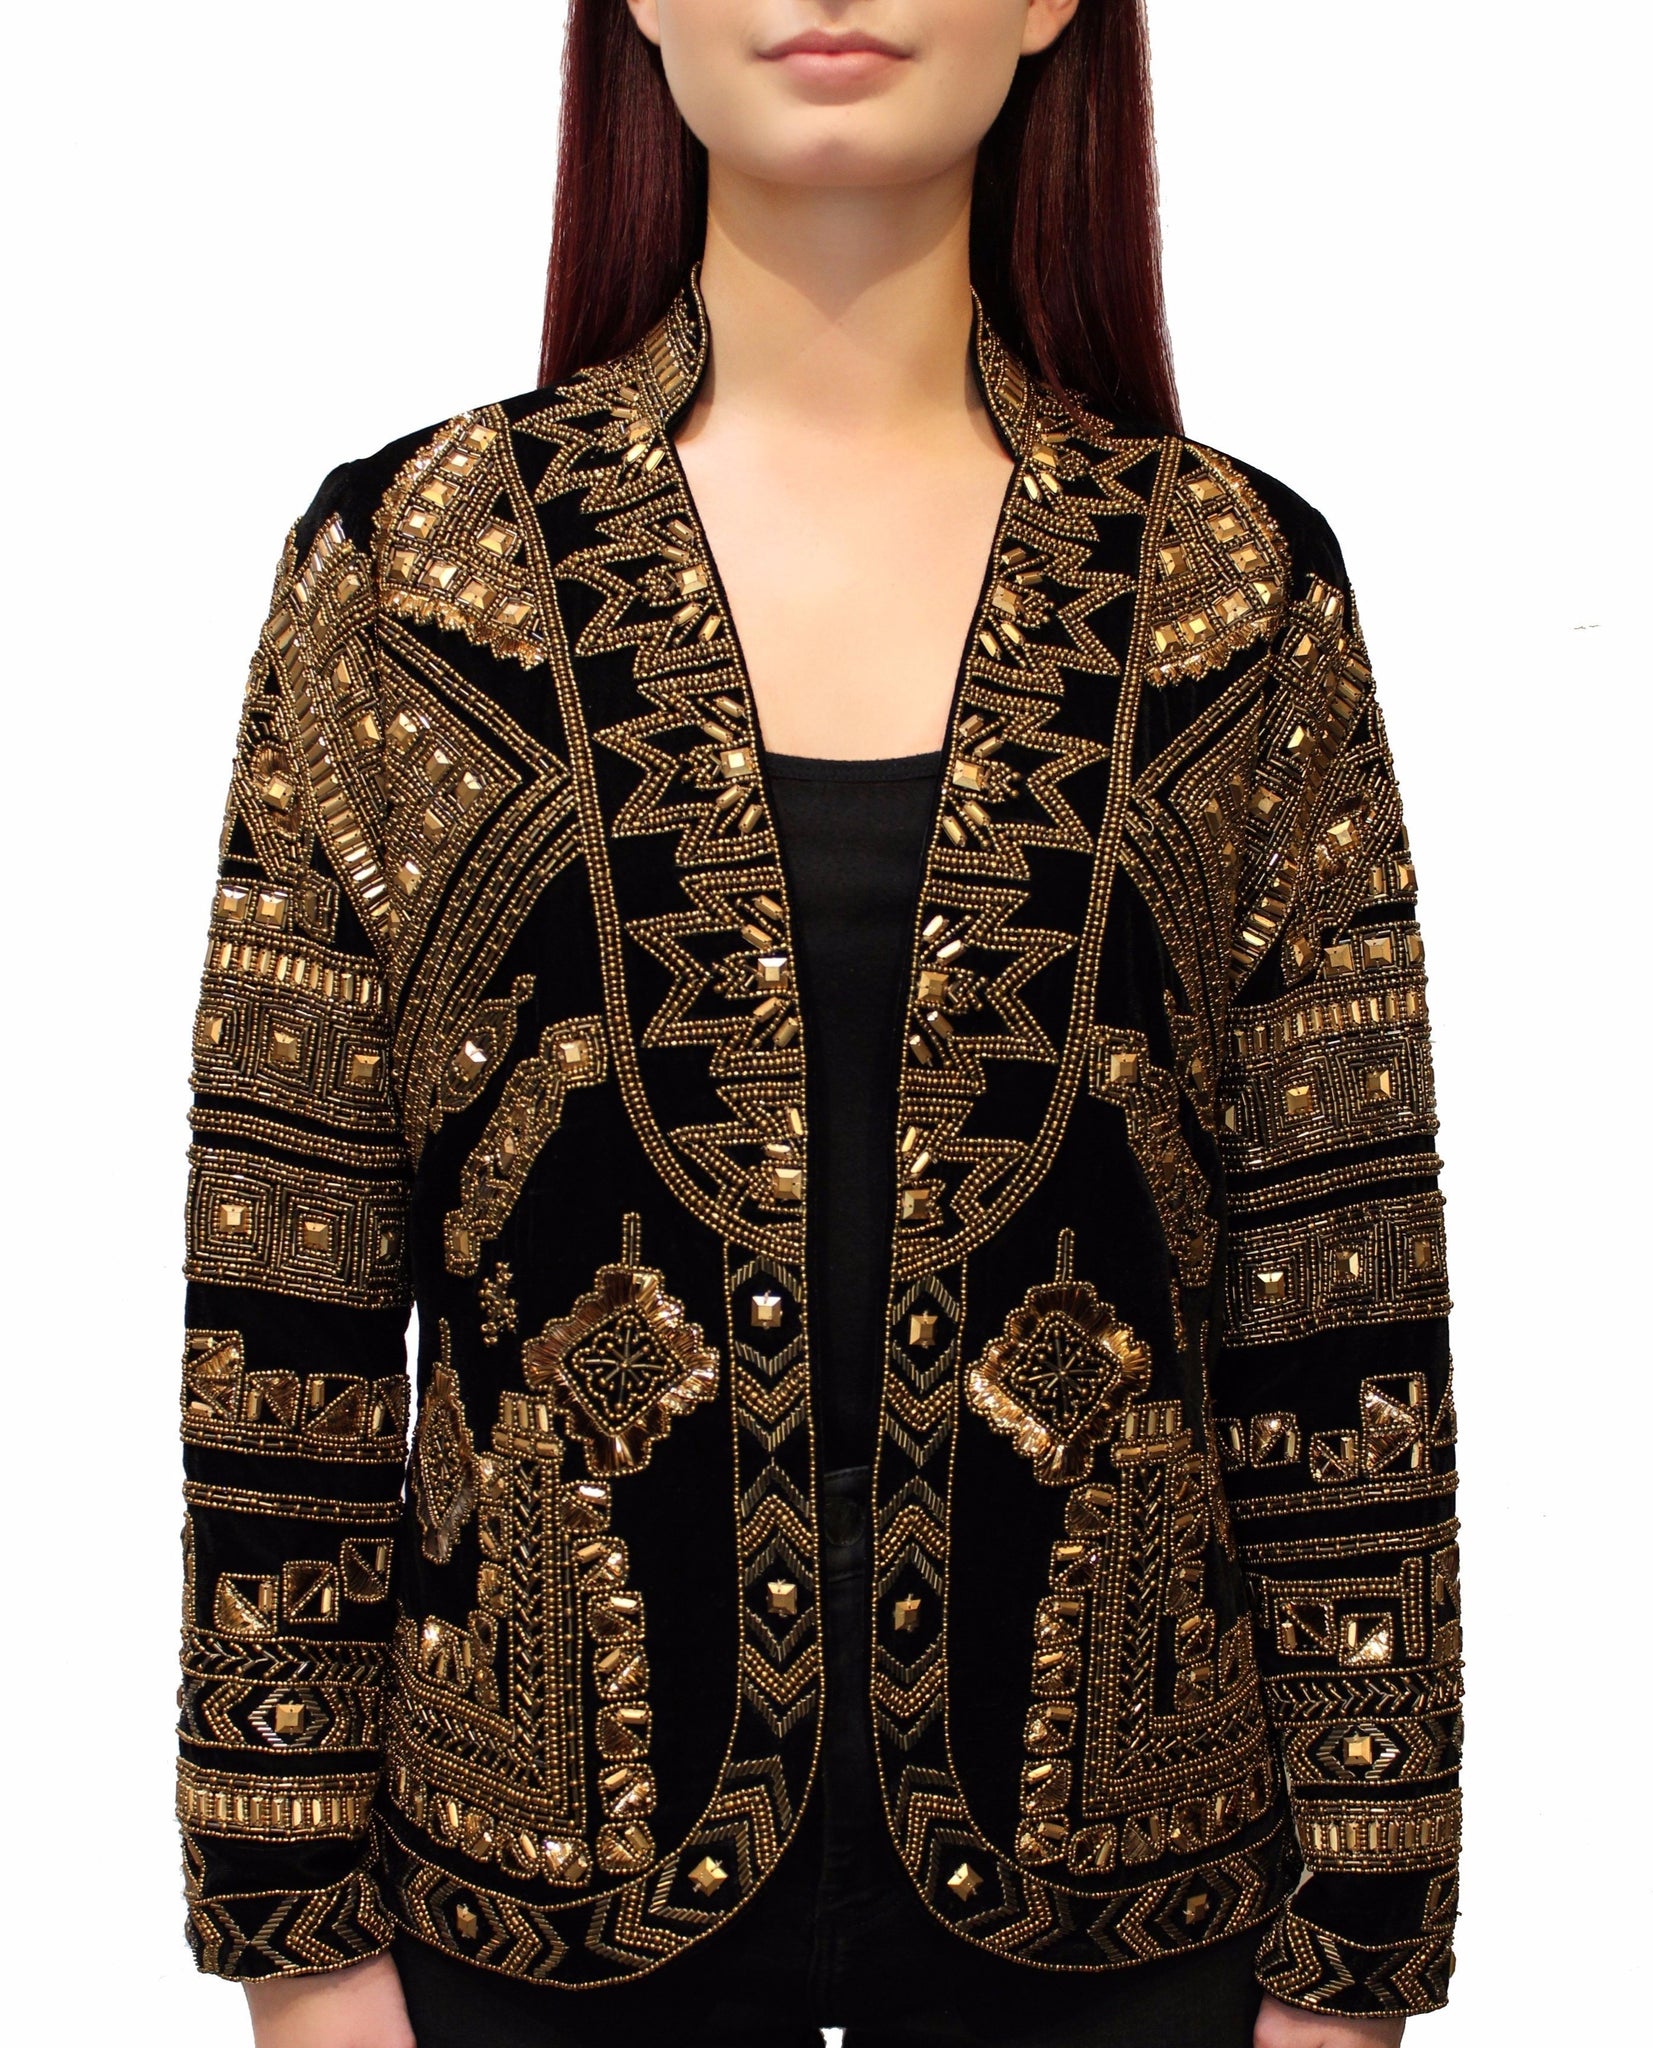 Black and gold tribal beaded belvet jacket front view